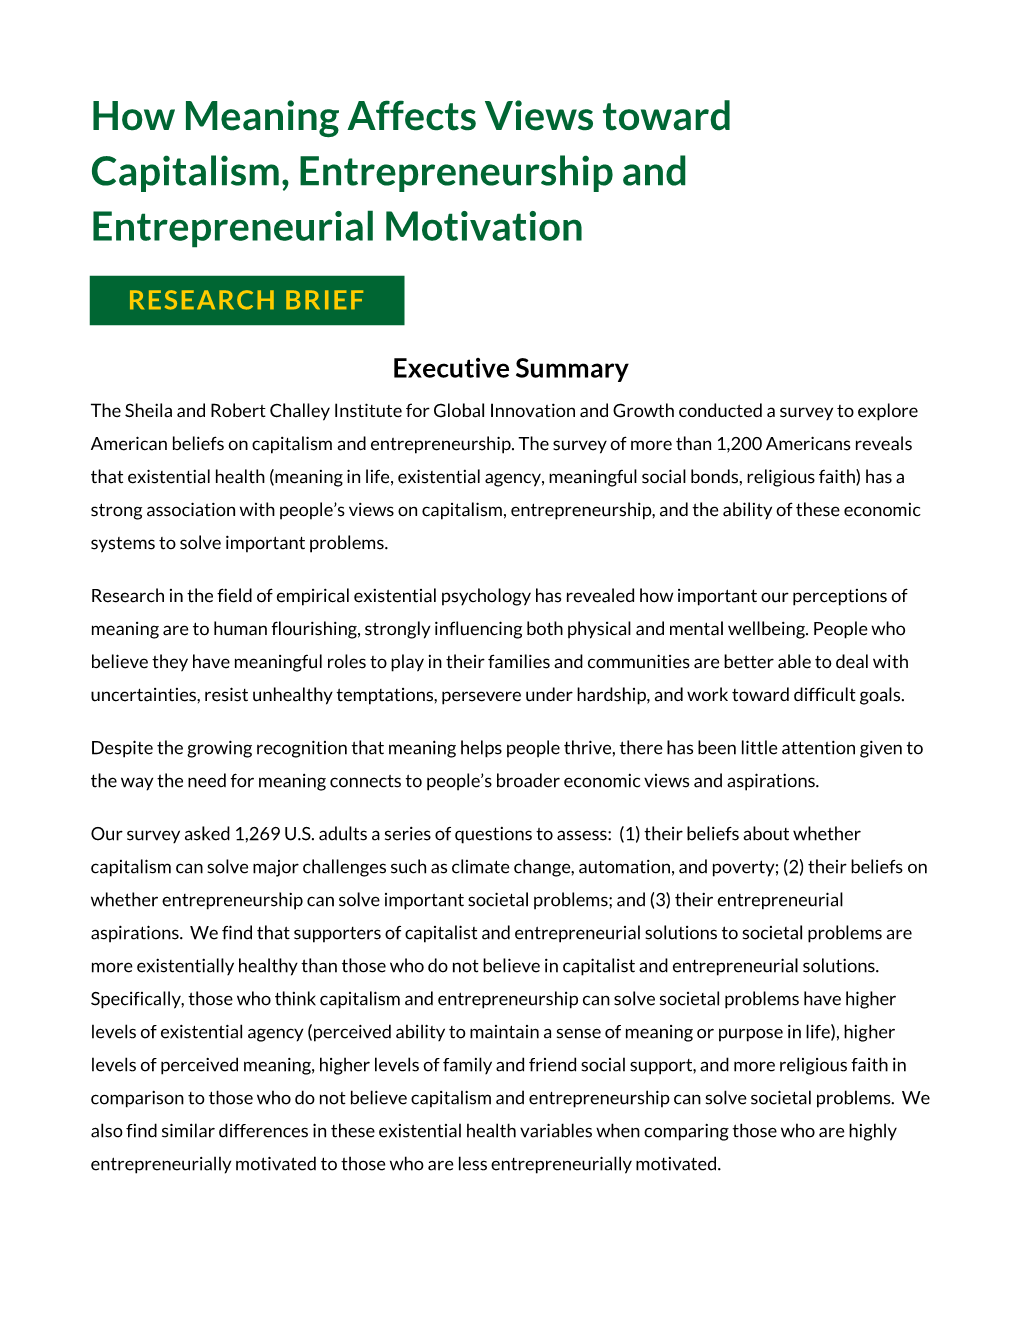 How Meaning Affects Views Toward Capitalism, Entrepreneurship and Entrepreneurial Motivation